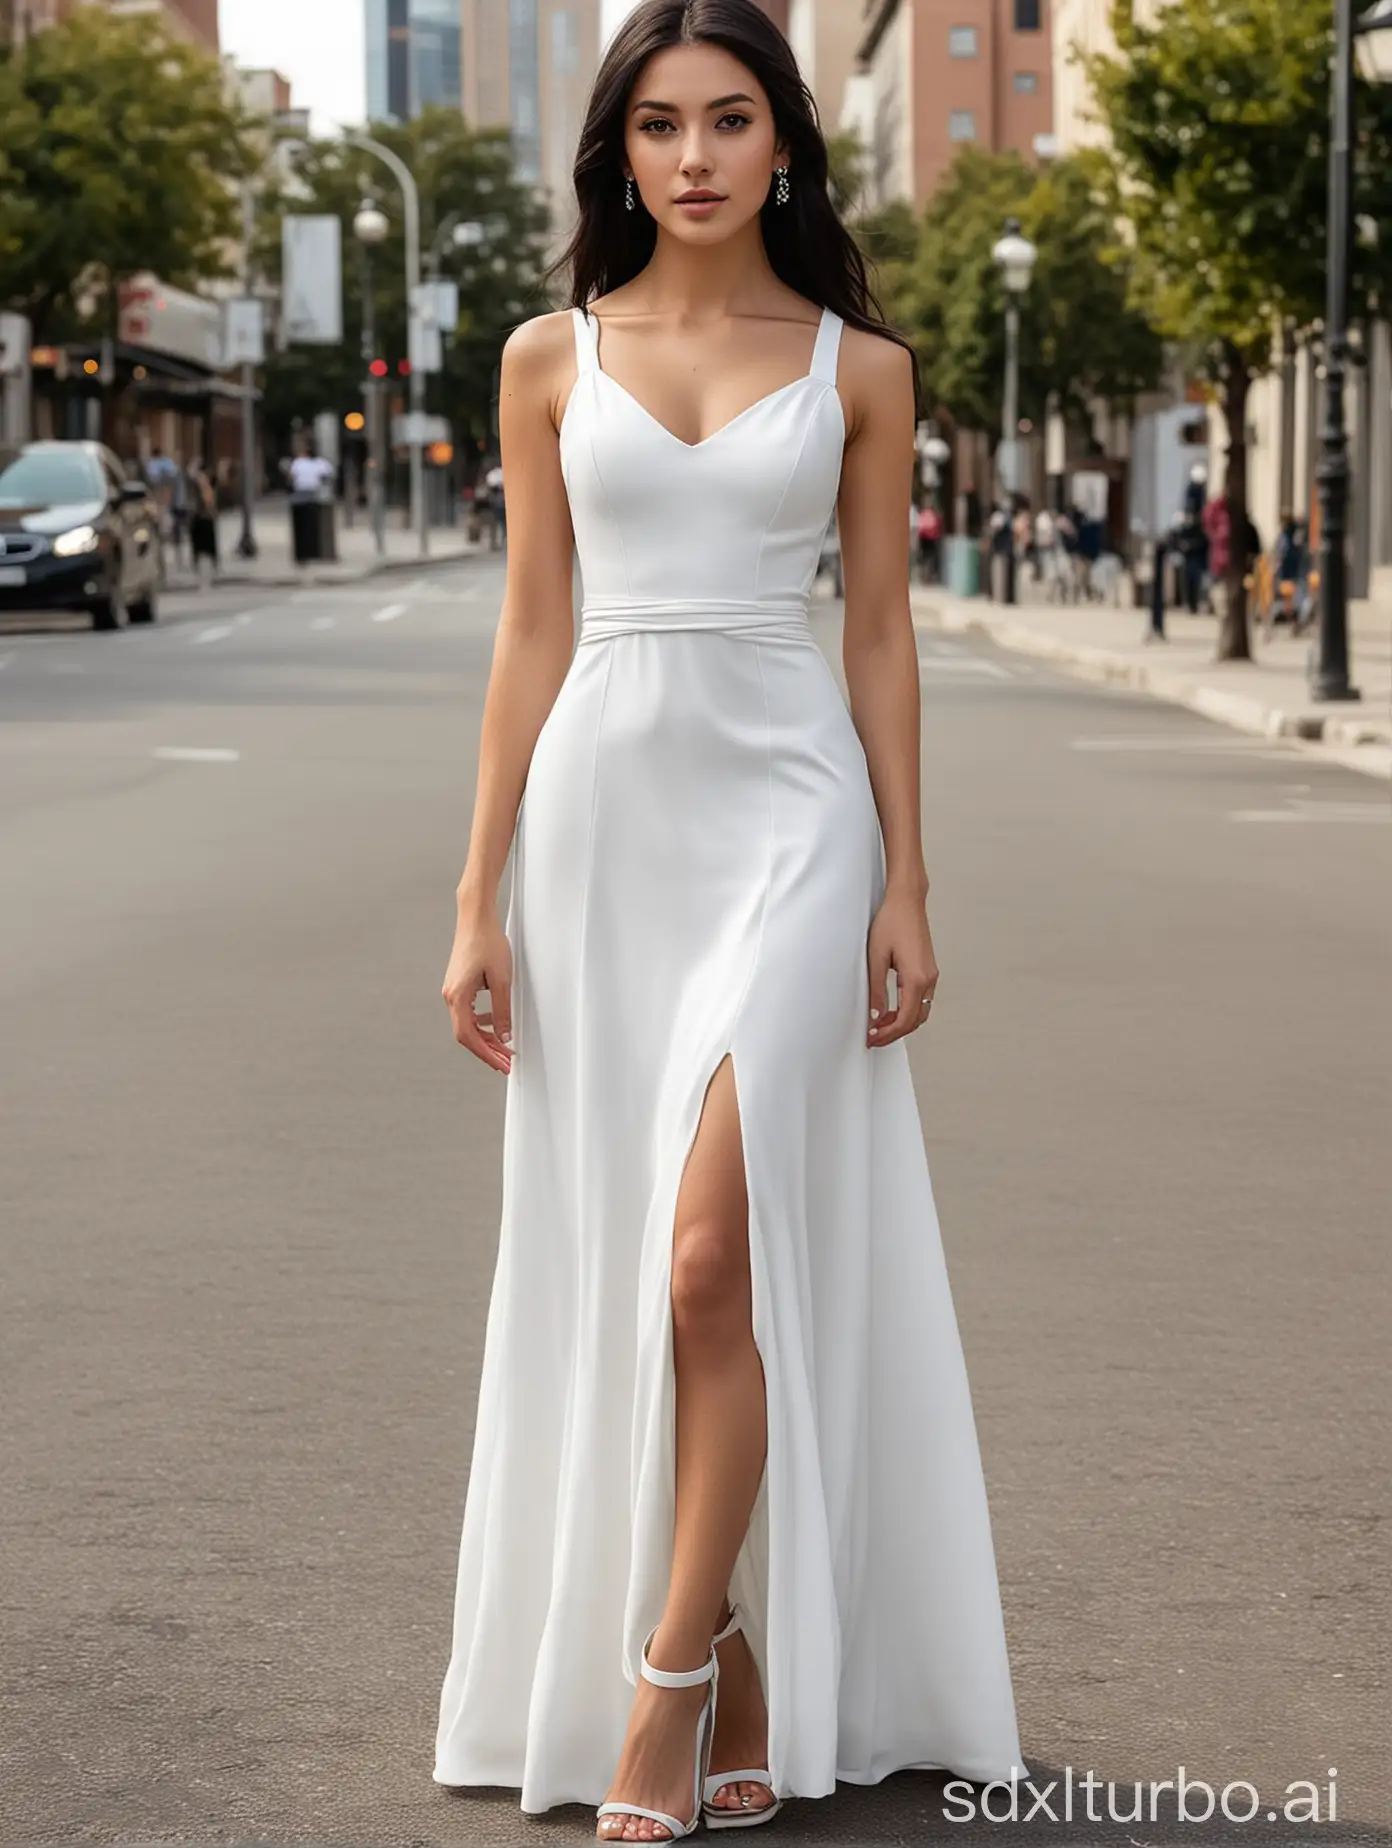 Character: A young, tall, slender girl with black eyes and long black hair, wearing a stunning pure white long dress, sleeveless. There are two straps around the waist. This dress features a round neckline and sleeveless design, with no slit in the skirt, highlighting the elegance of the attire. Dress details: Made of polyester fiber, it can cinch the waist and slim the figure. Pose: Leaning sideways by the urban roadside; Shoes: Paired with exquisitely designed open-toe high heels, complementing the fashion of the dress.